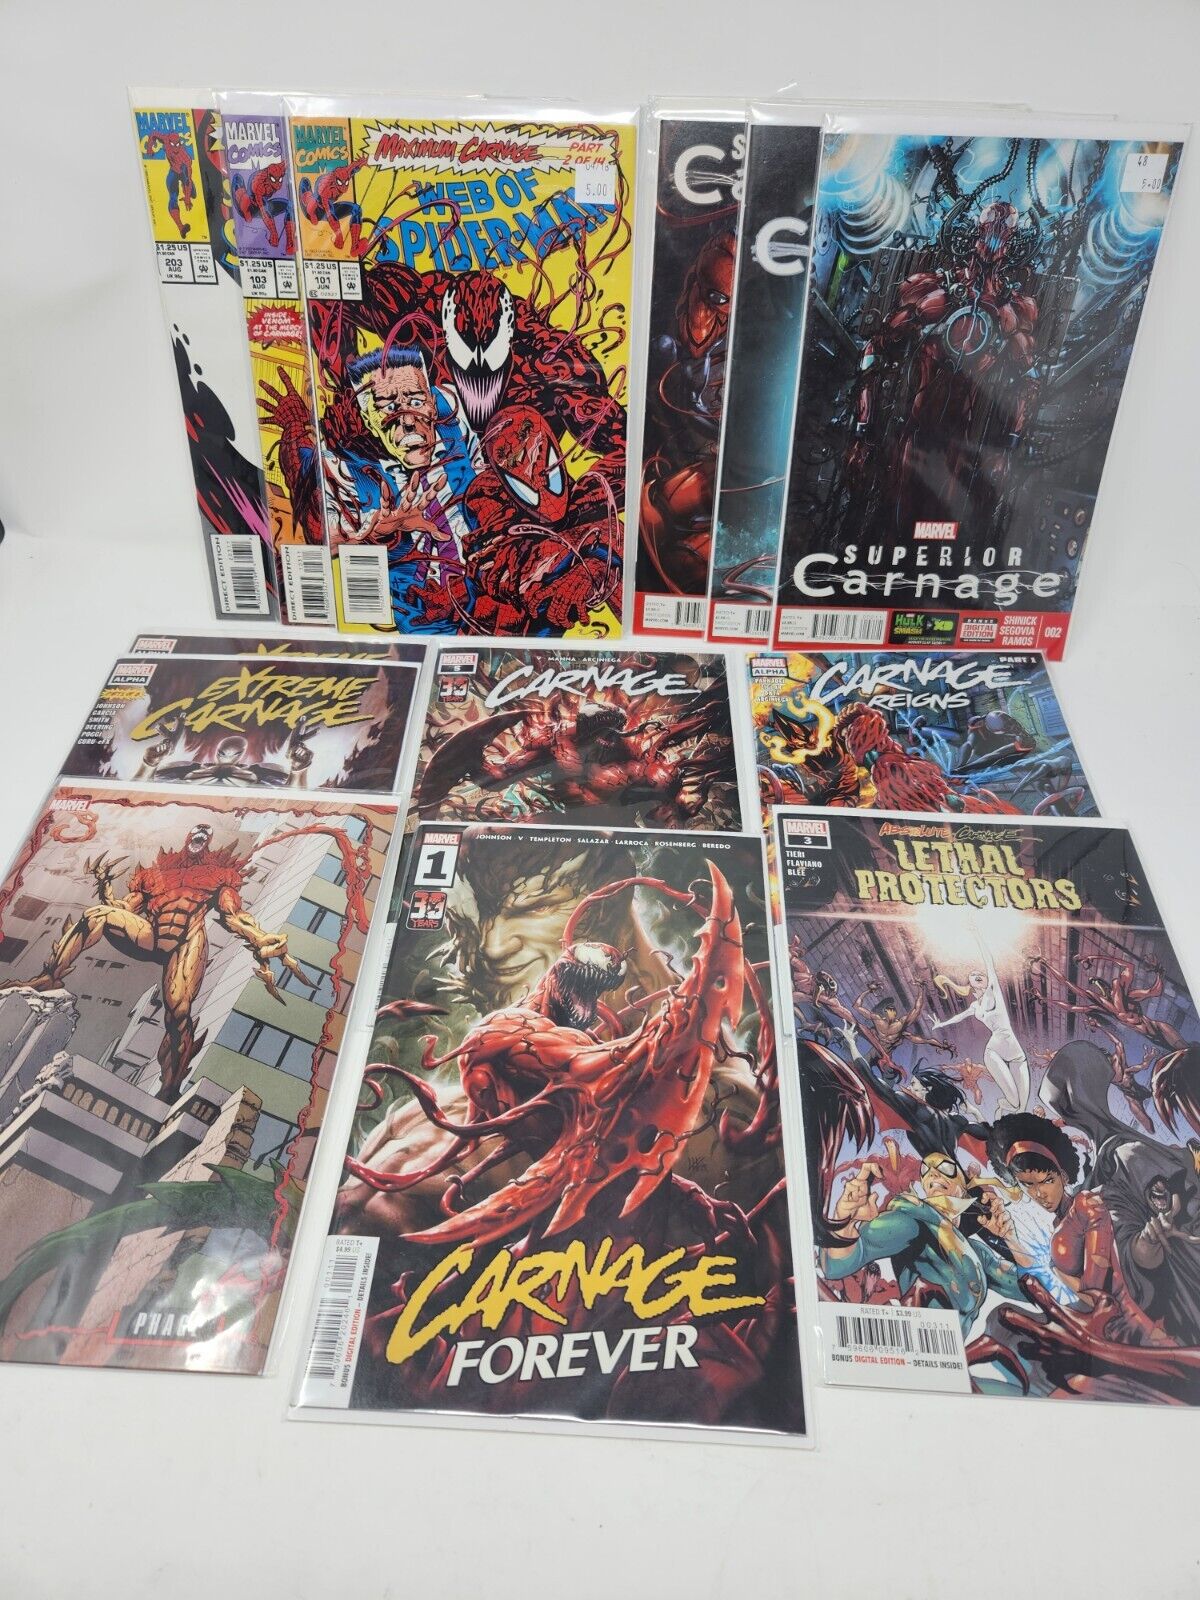 Mixed Carnage 13 Comic Book Lot Maximum Superior Extreme Forever Reigns Absolute